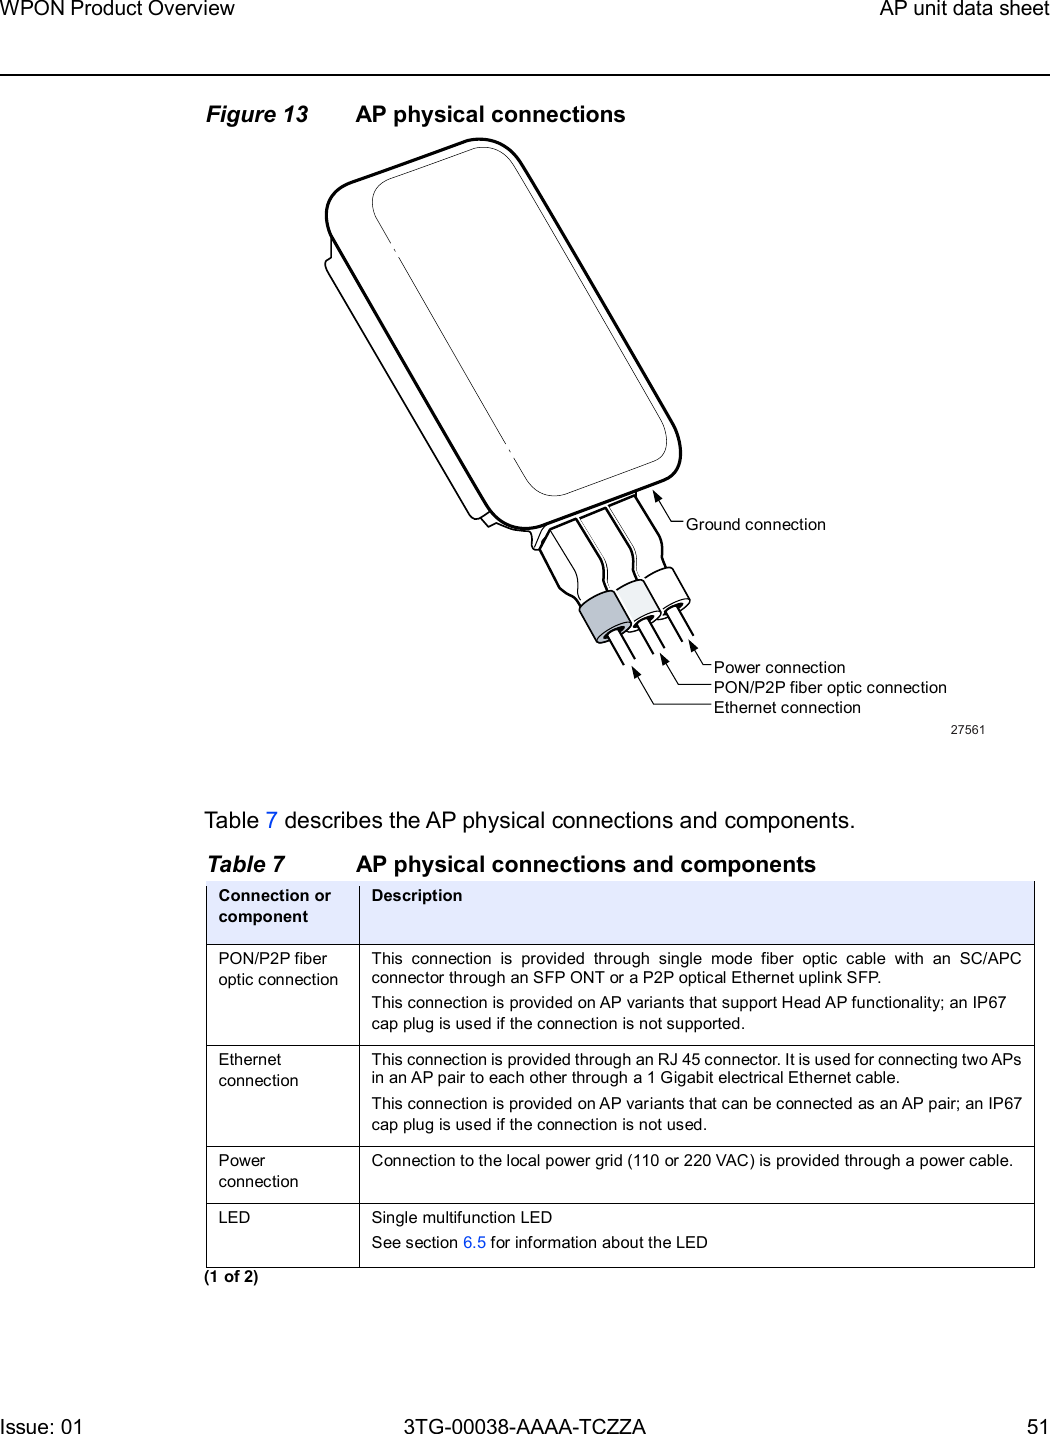 Page 51 of Nokia Bell 7577WPONAPAC WPON User Manual WPON Product Overview